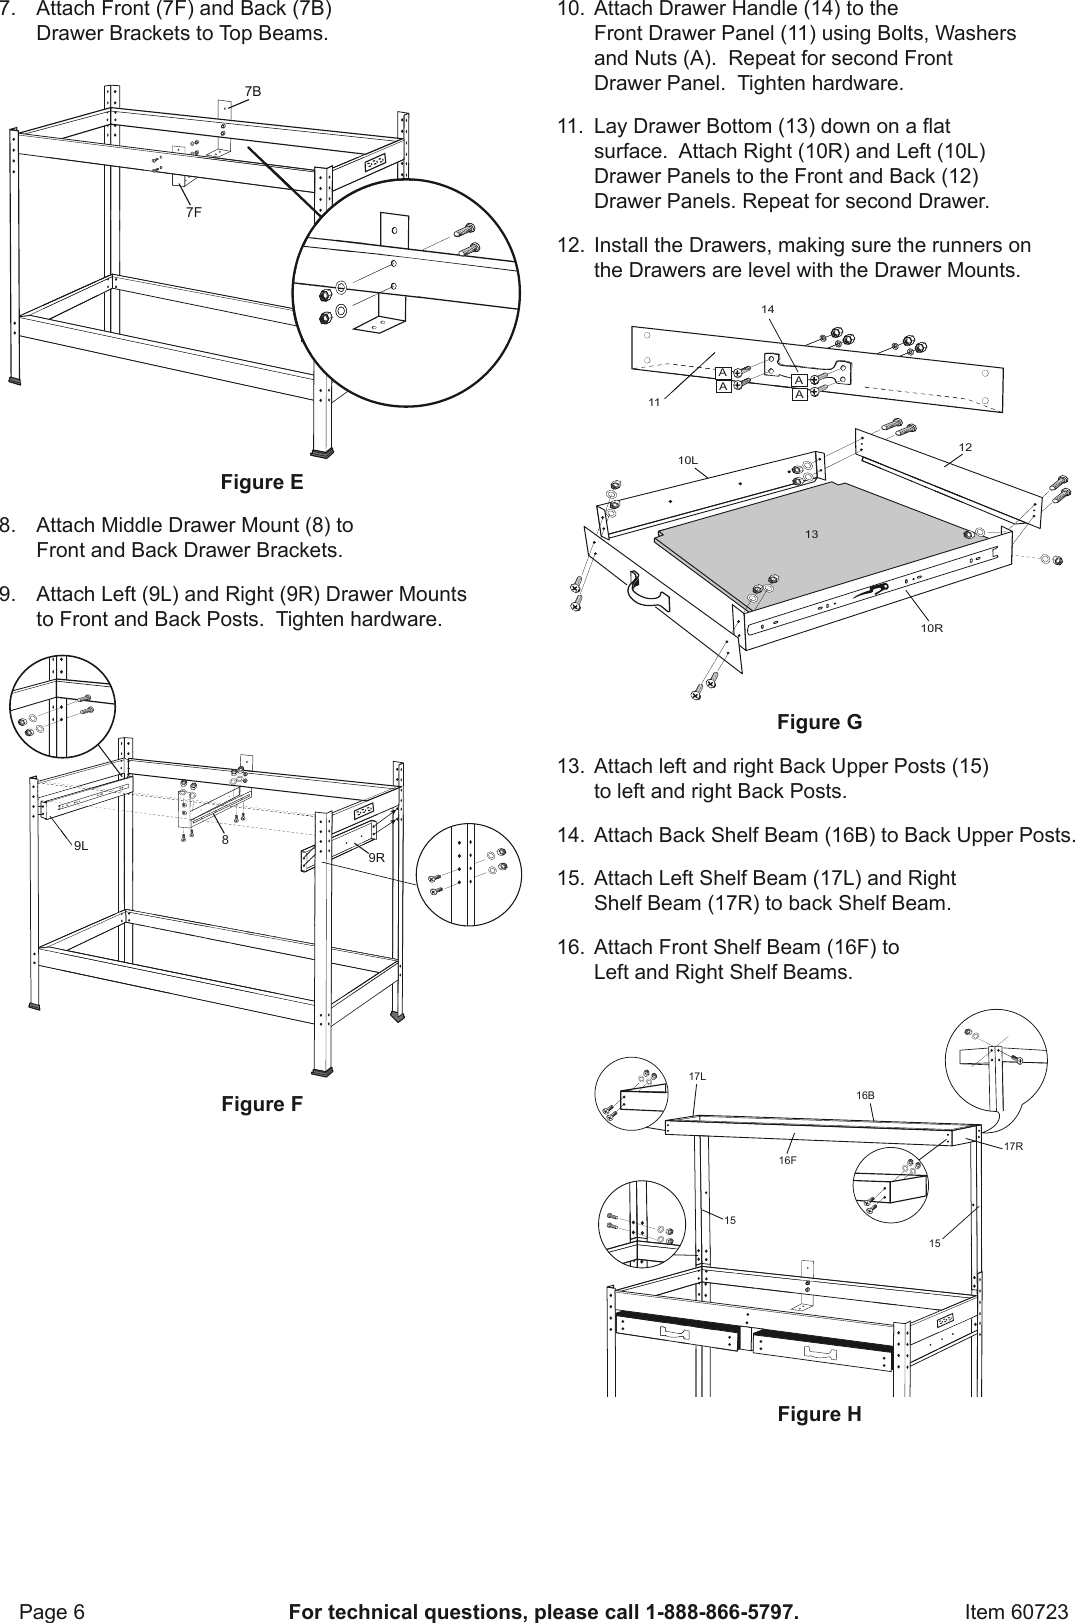 Page 6 of 12 - Harbor-Freight Harbor-Freight-Multipurpose-Workbench-With-Light-Product-Manual-  Harbor-freight-multipurpose-workbench-with-light-product-manual